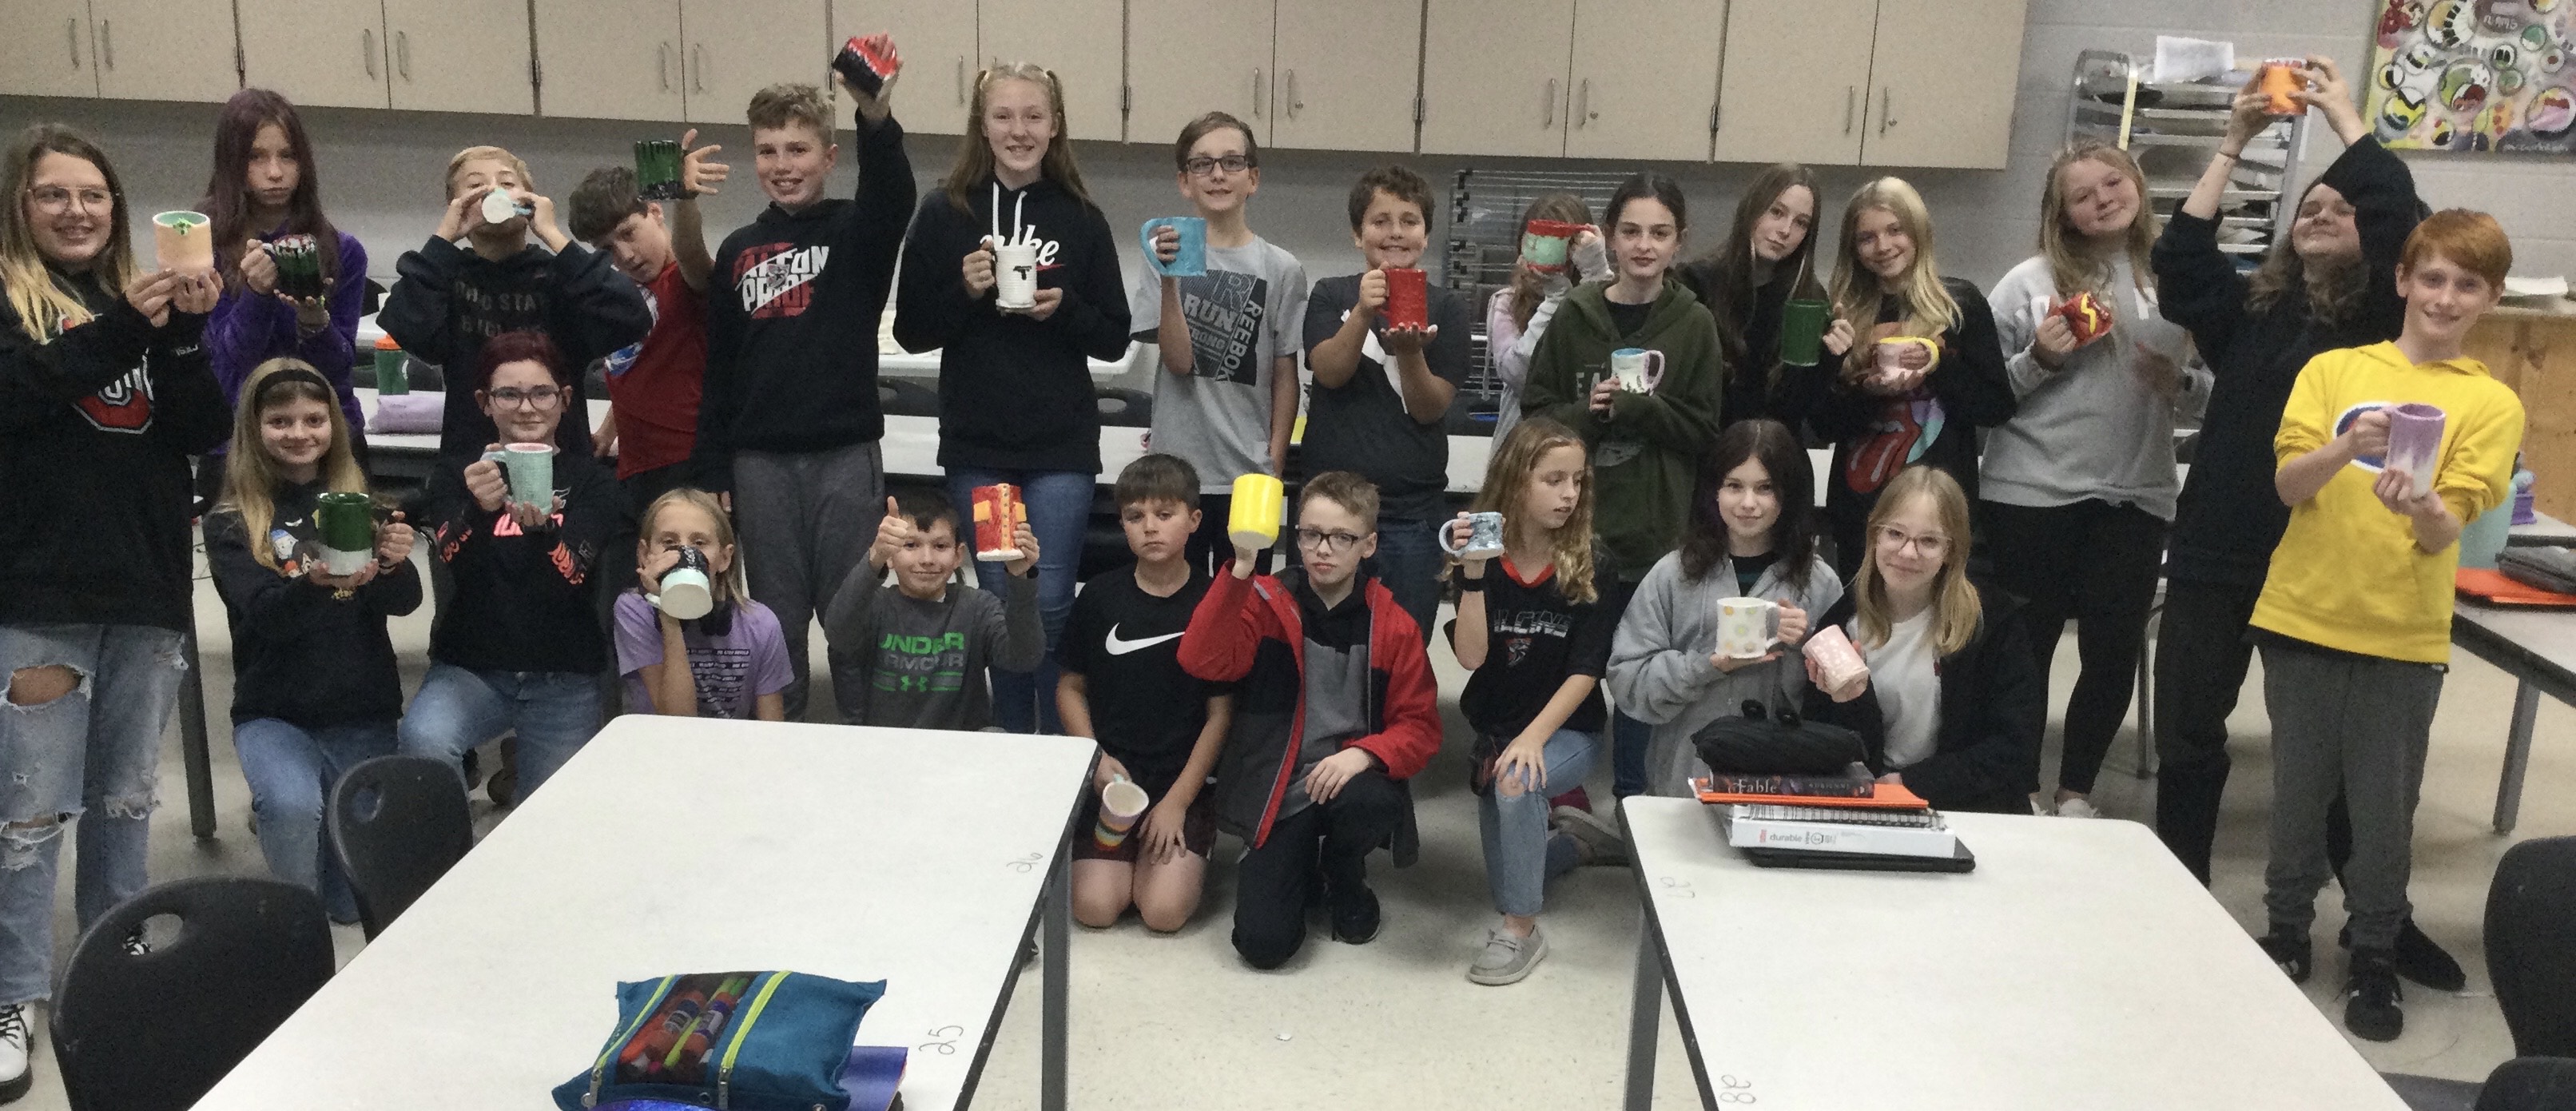 Another classroom photo of students holding their mugs.